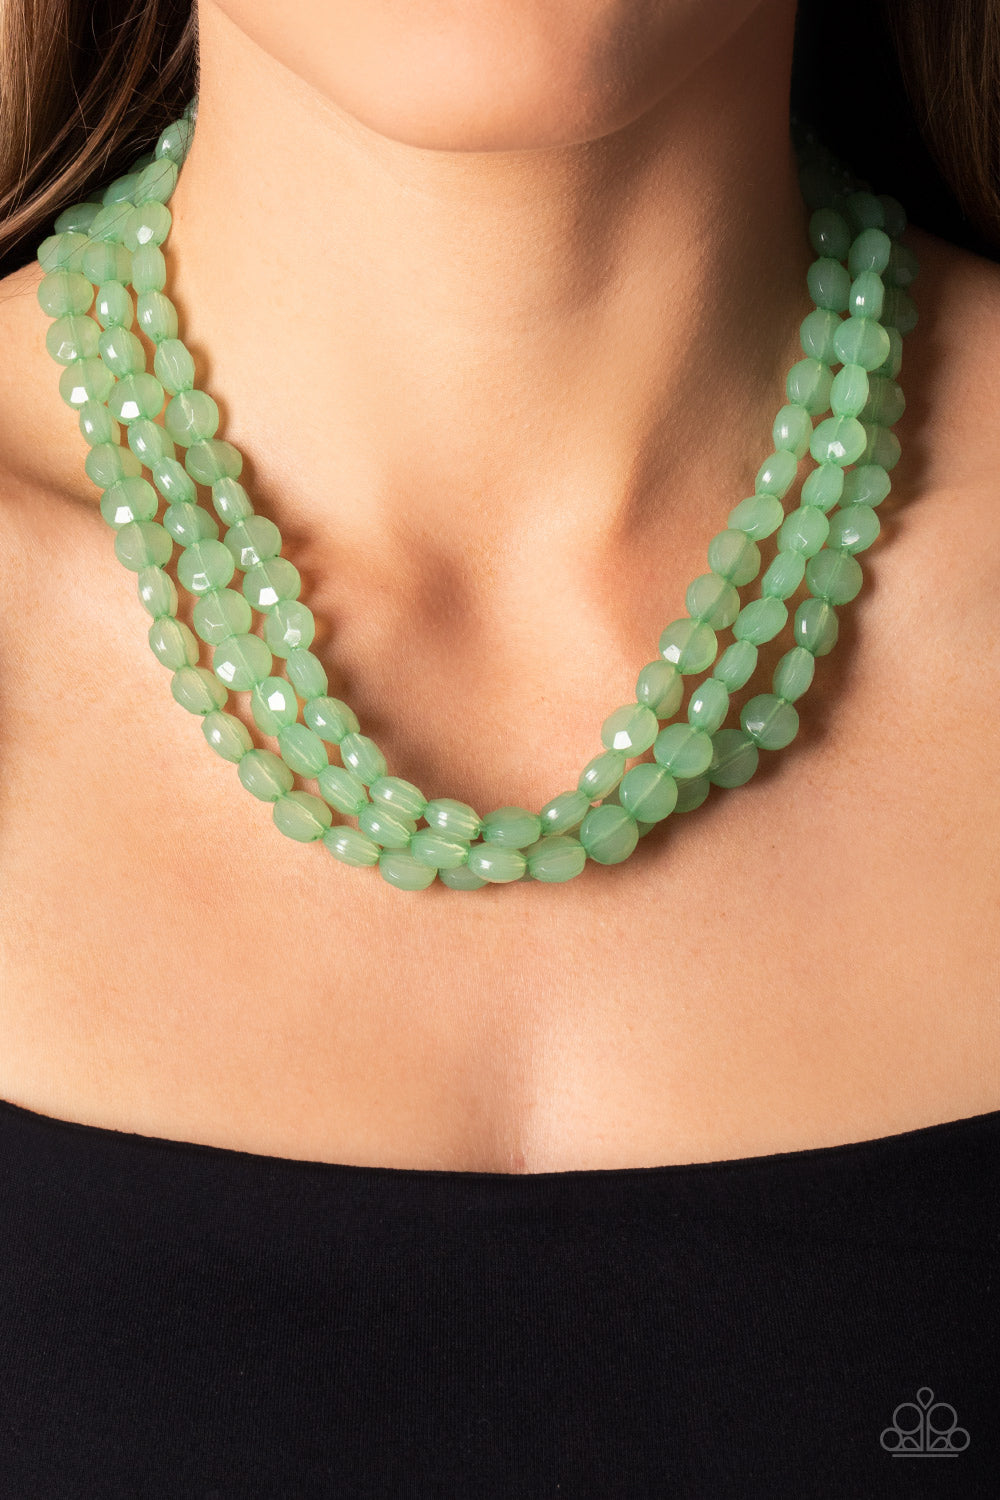 Boundless Bliss - Green - VJ Bedazzled Jewelry